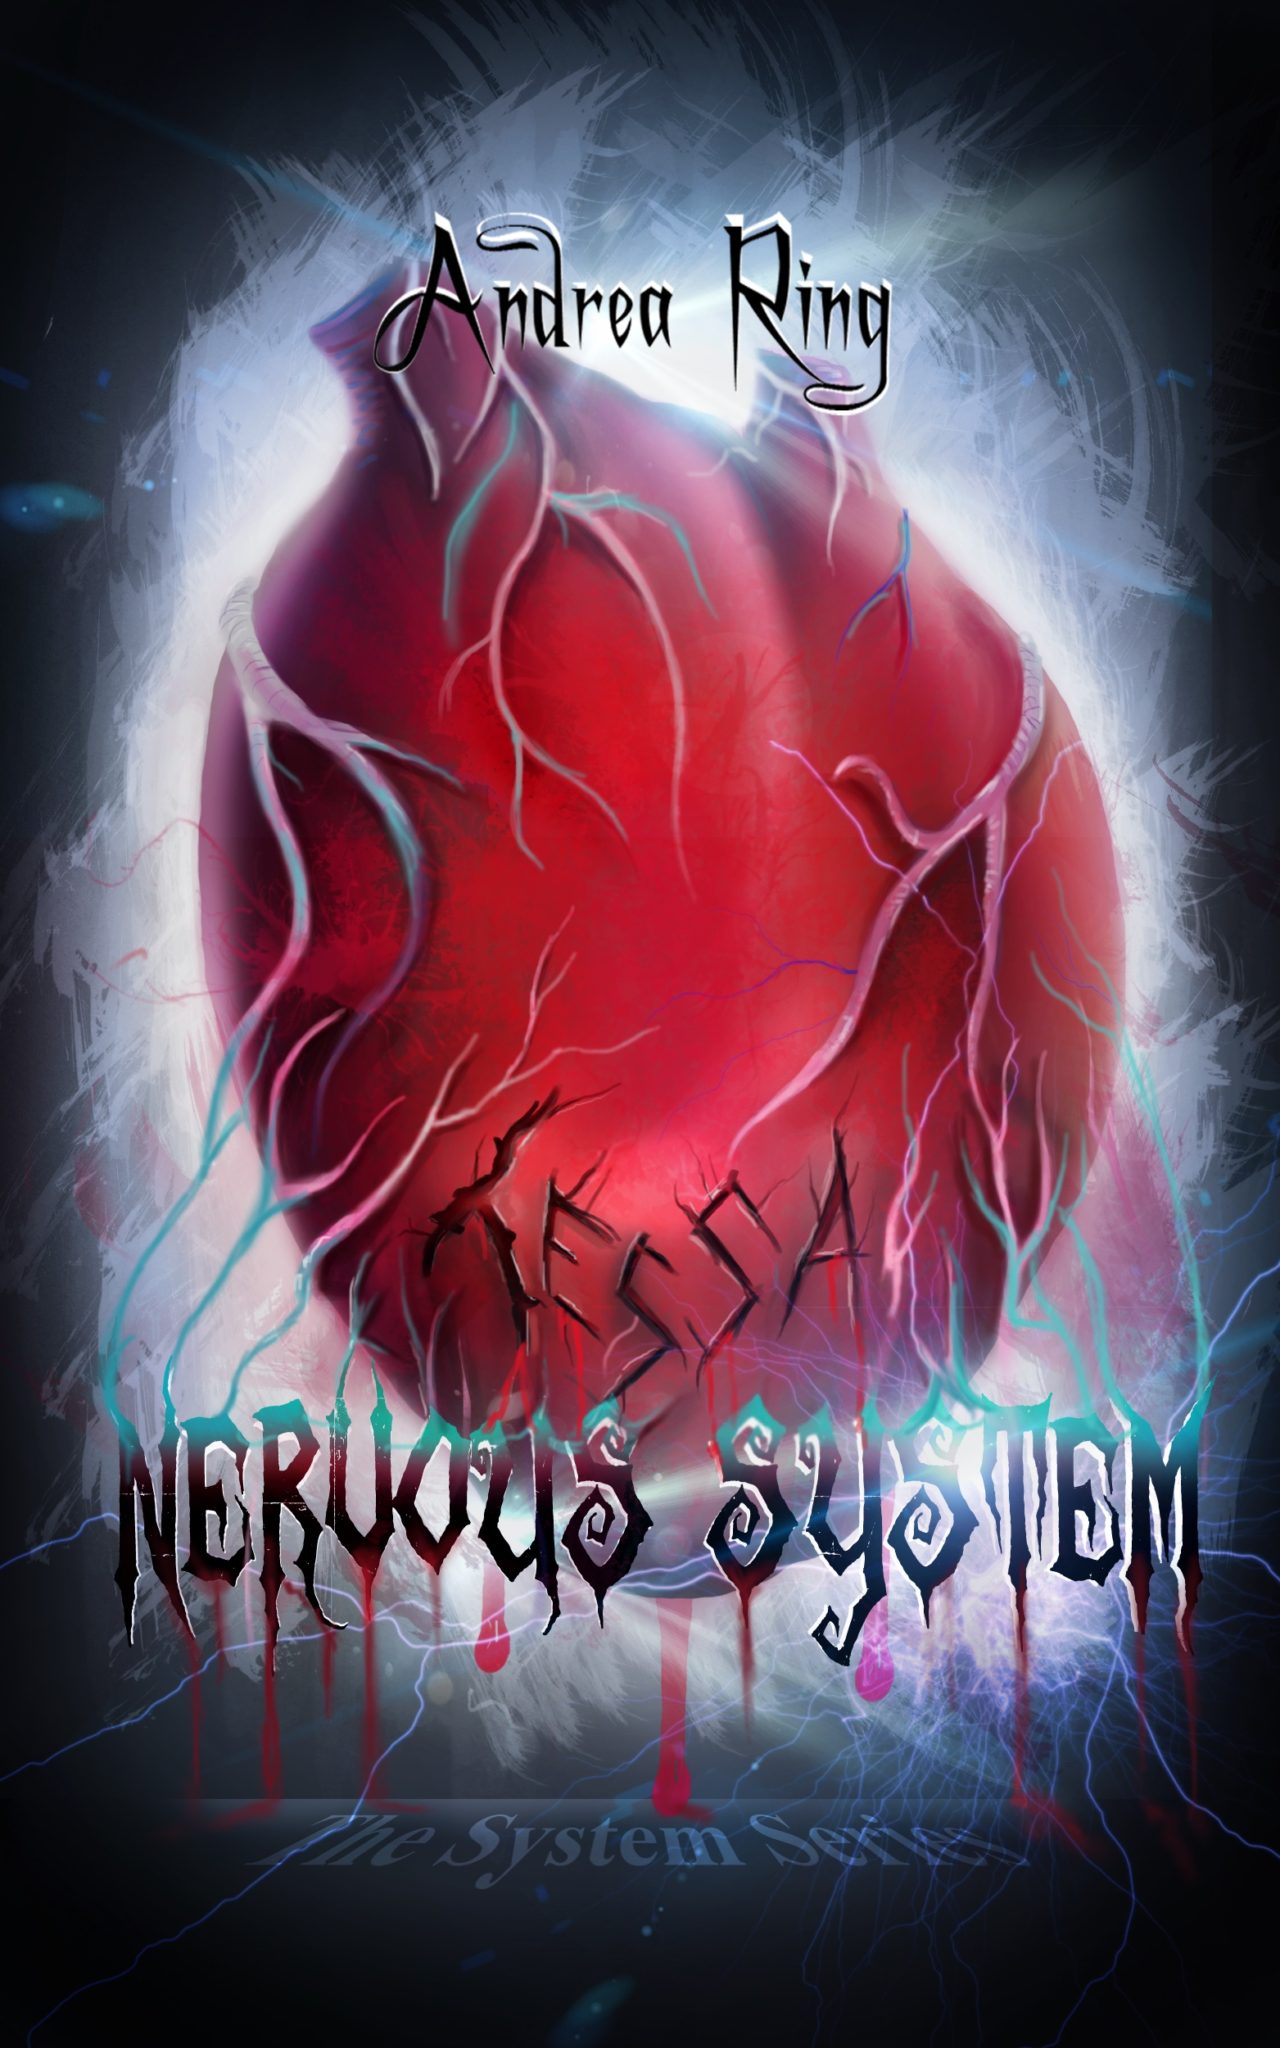 Nervous System by Andrea Ring